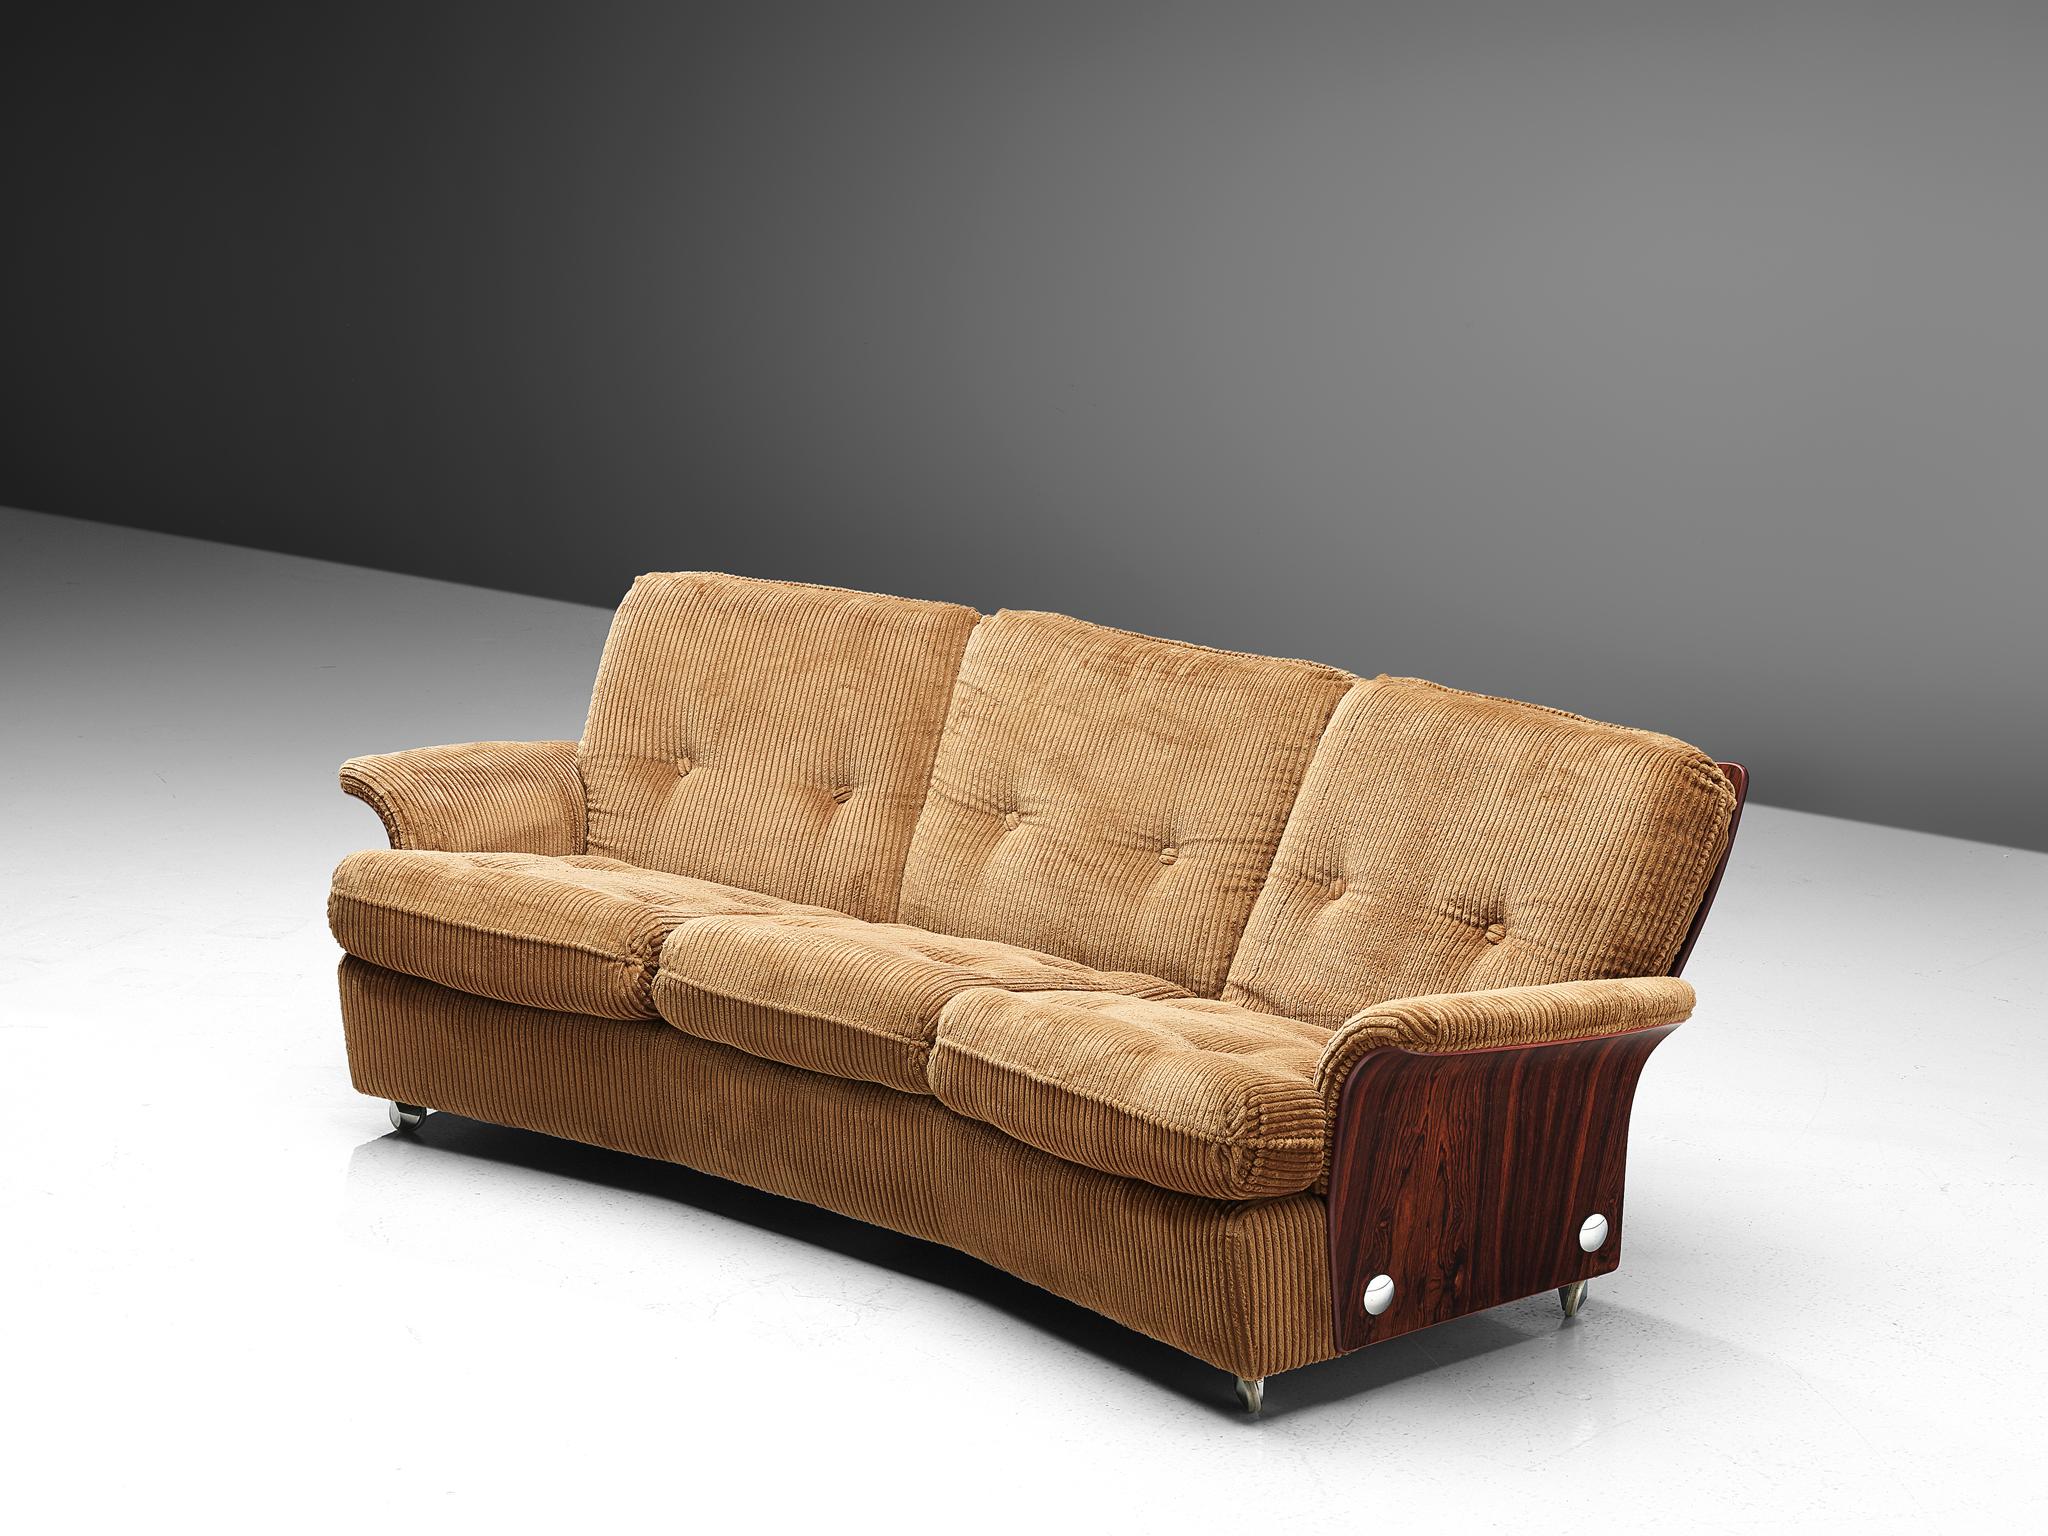 Three-seat sofa, corduroy upholstery, rosewood, Europe. 1950s.

VAT within the EU:
When buying or delivering an item within the EU, VAT usually applies and will be added.